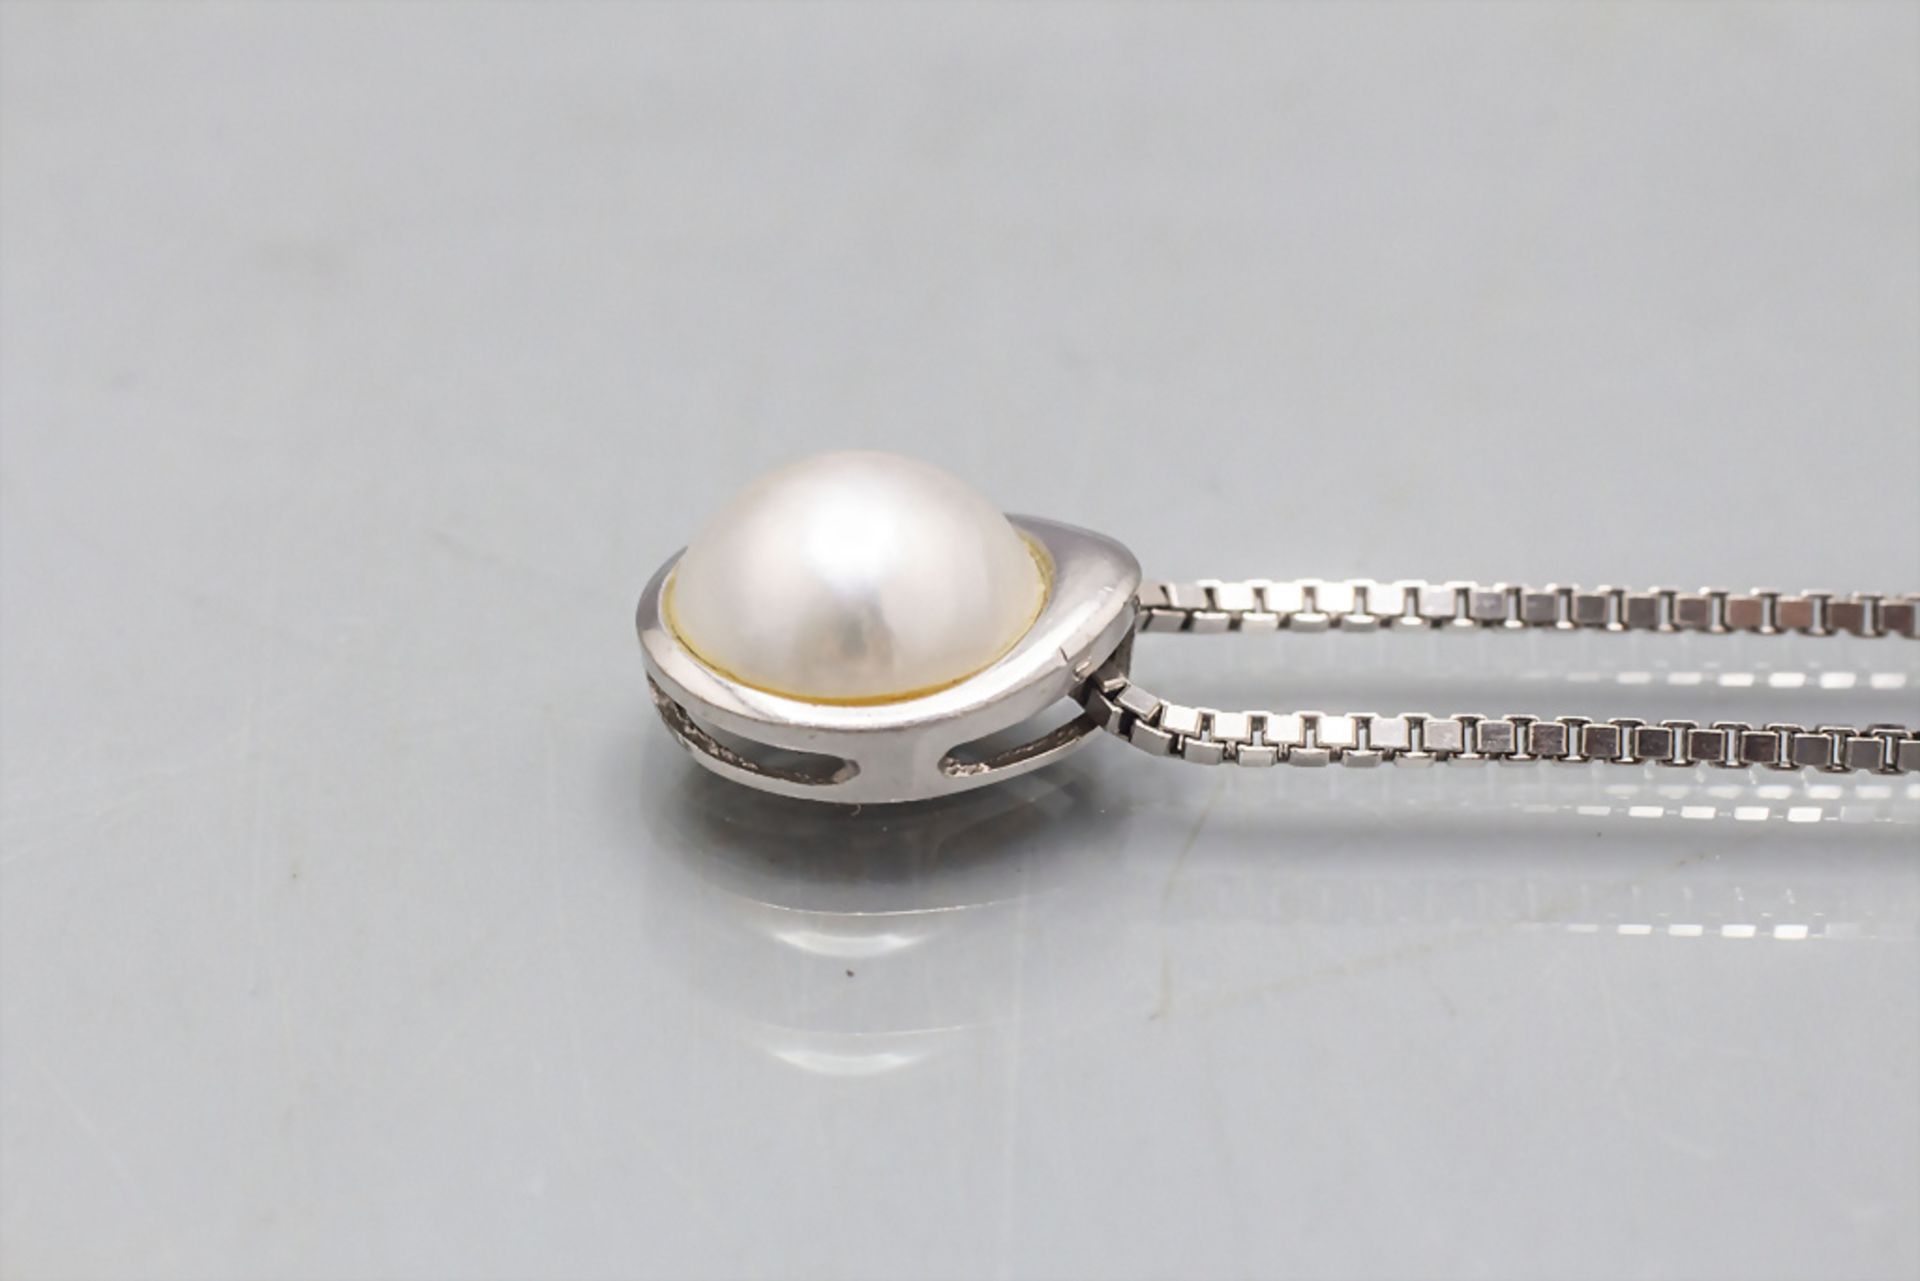 Weißgoldkette mit Perlenanhänger / A 14 ct white gold necklace with pearl pendant - Image 2 of 4